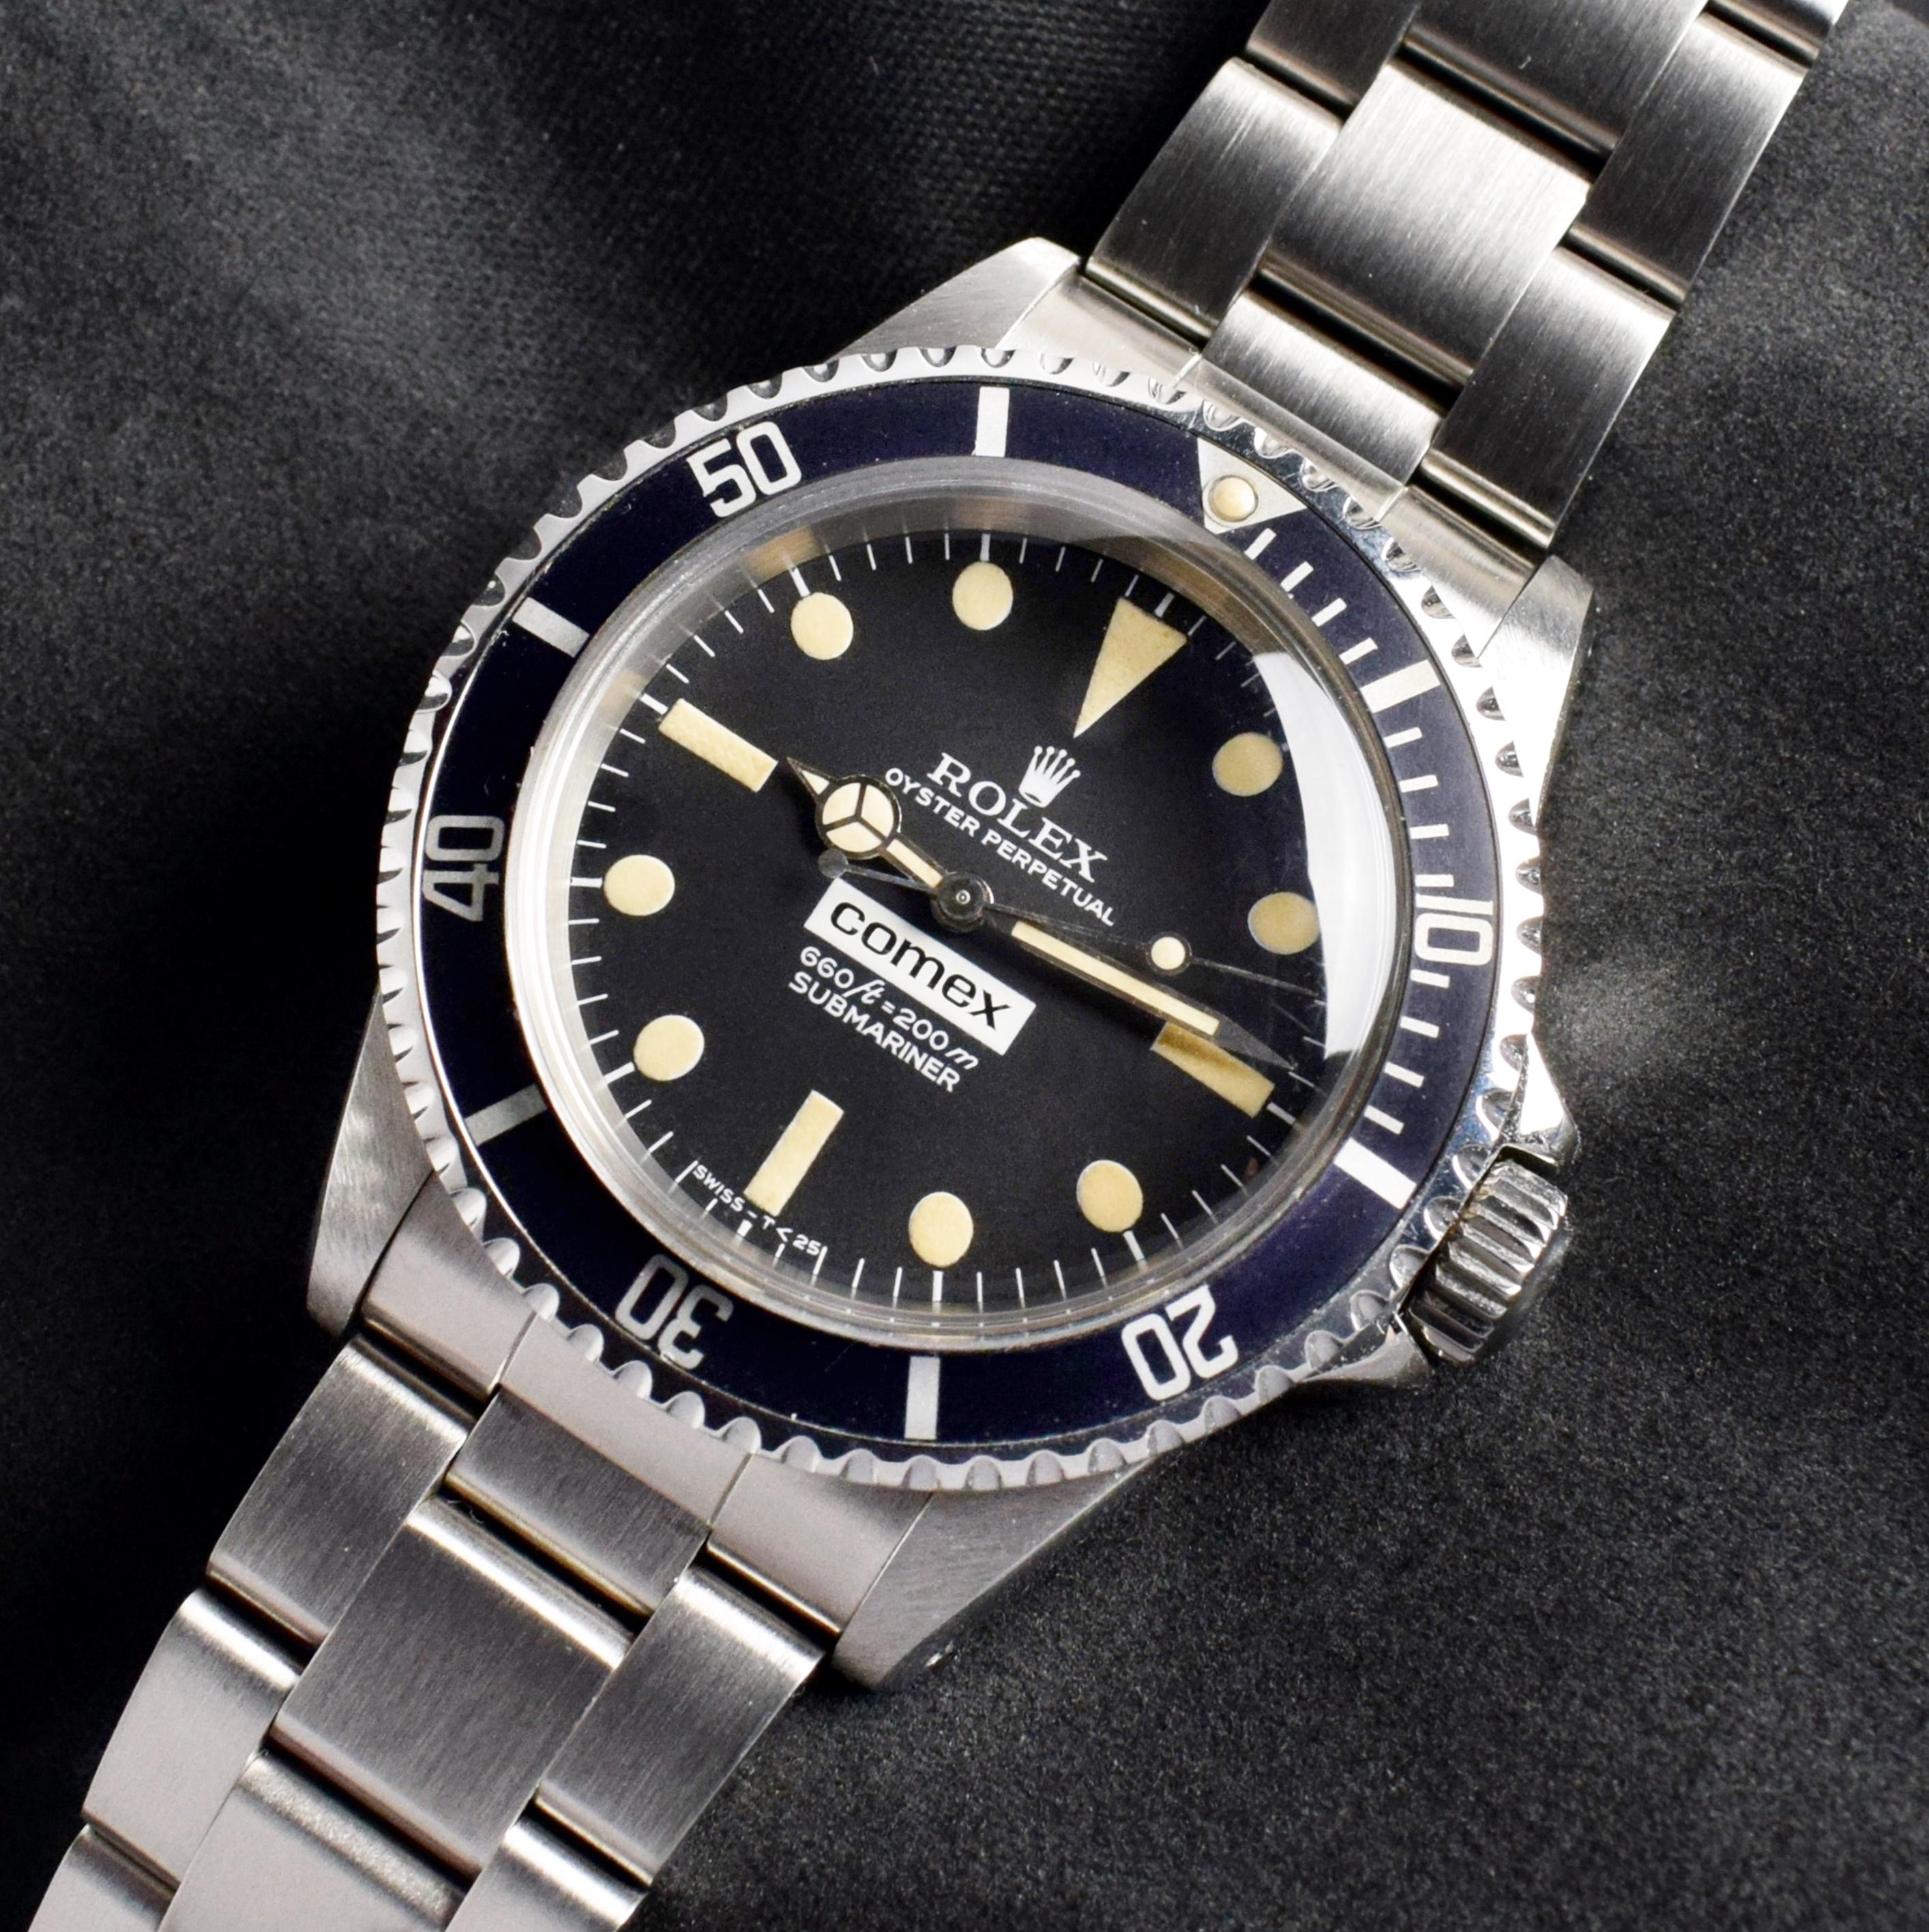 Brand: Vintage Rolex
Model: 5514
Year: 1977
Serial number: 52xxxxx
Reference: OT1427

COMEX was the first experimental diving and engineering organization in the commercial market from 60’s to 80’s leading the world in off-shore operations. Rolex